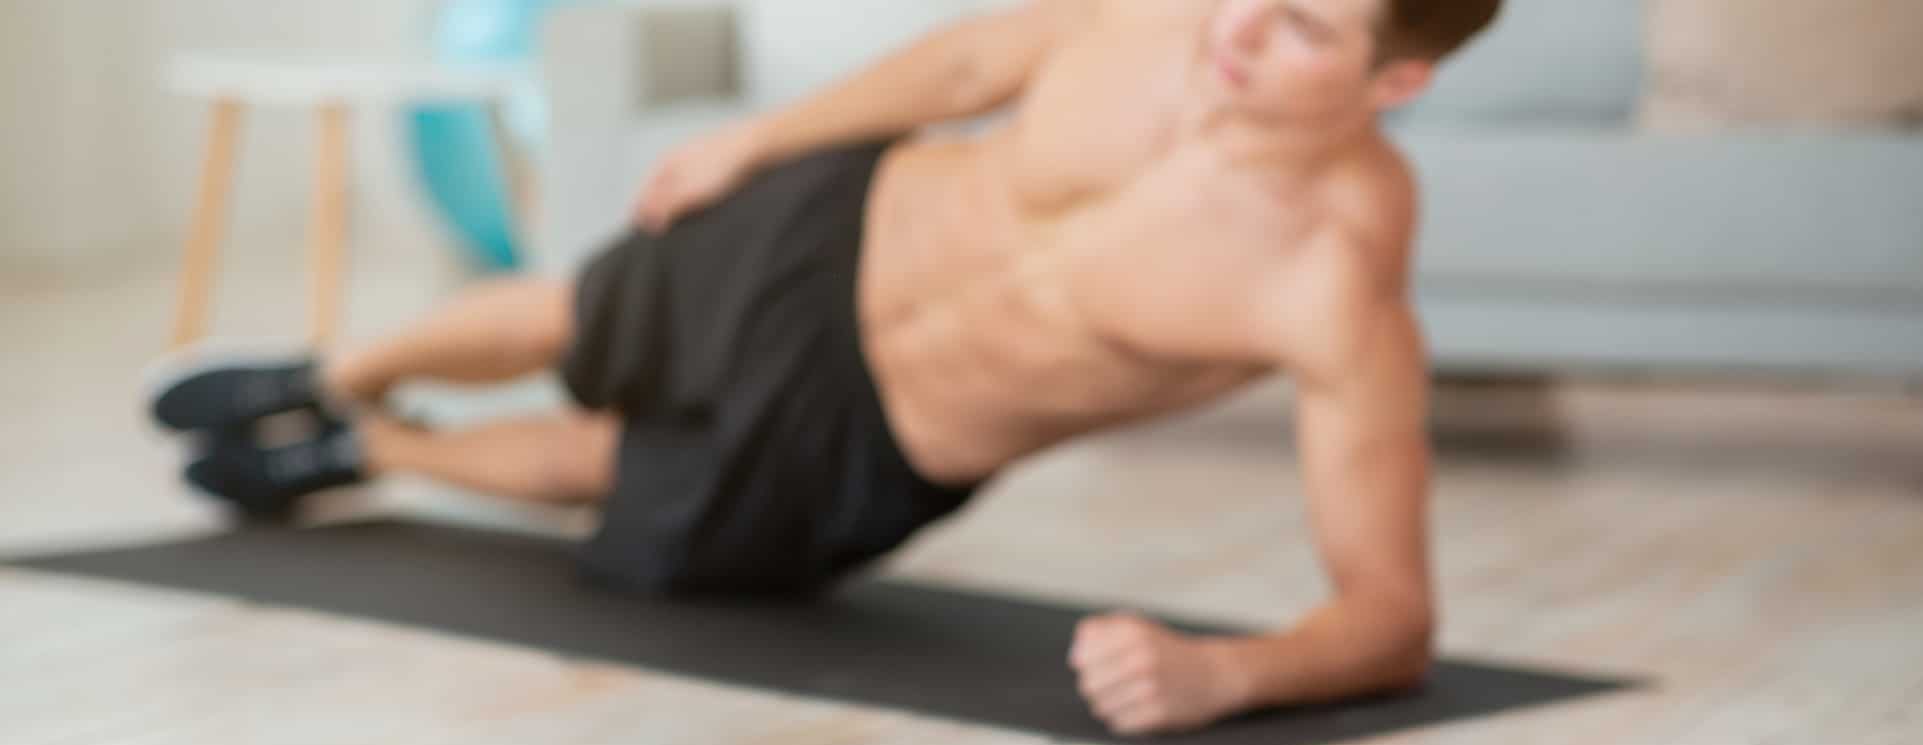 Dumbbells And Glass For Protein Shake Close Up, Guy Shirtless Makes Side Plank, On Mat In Living Room Interior